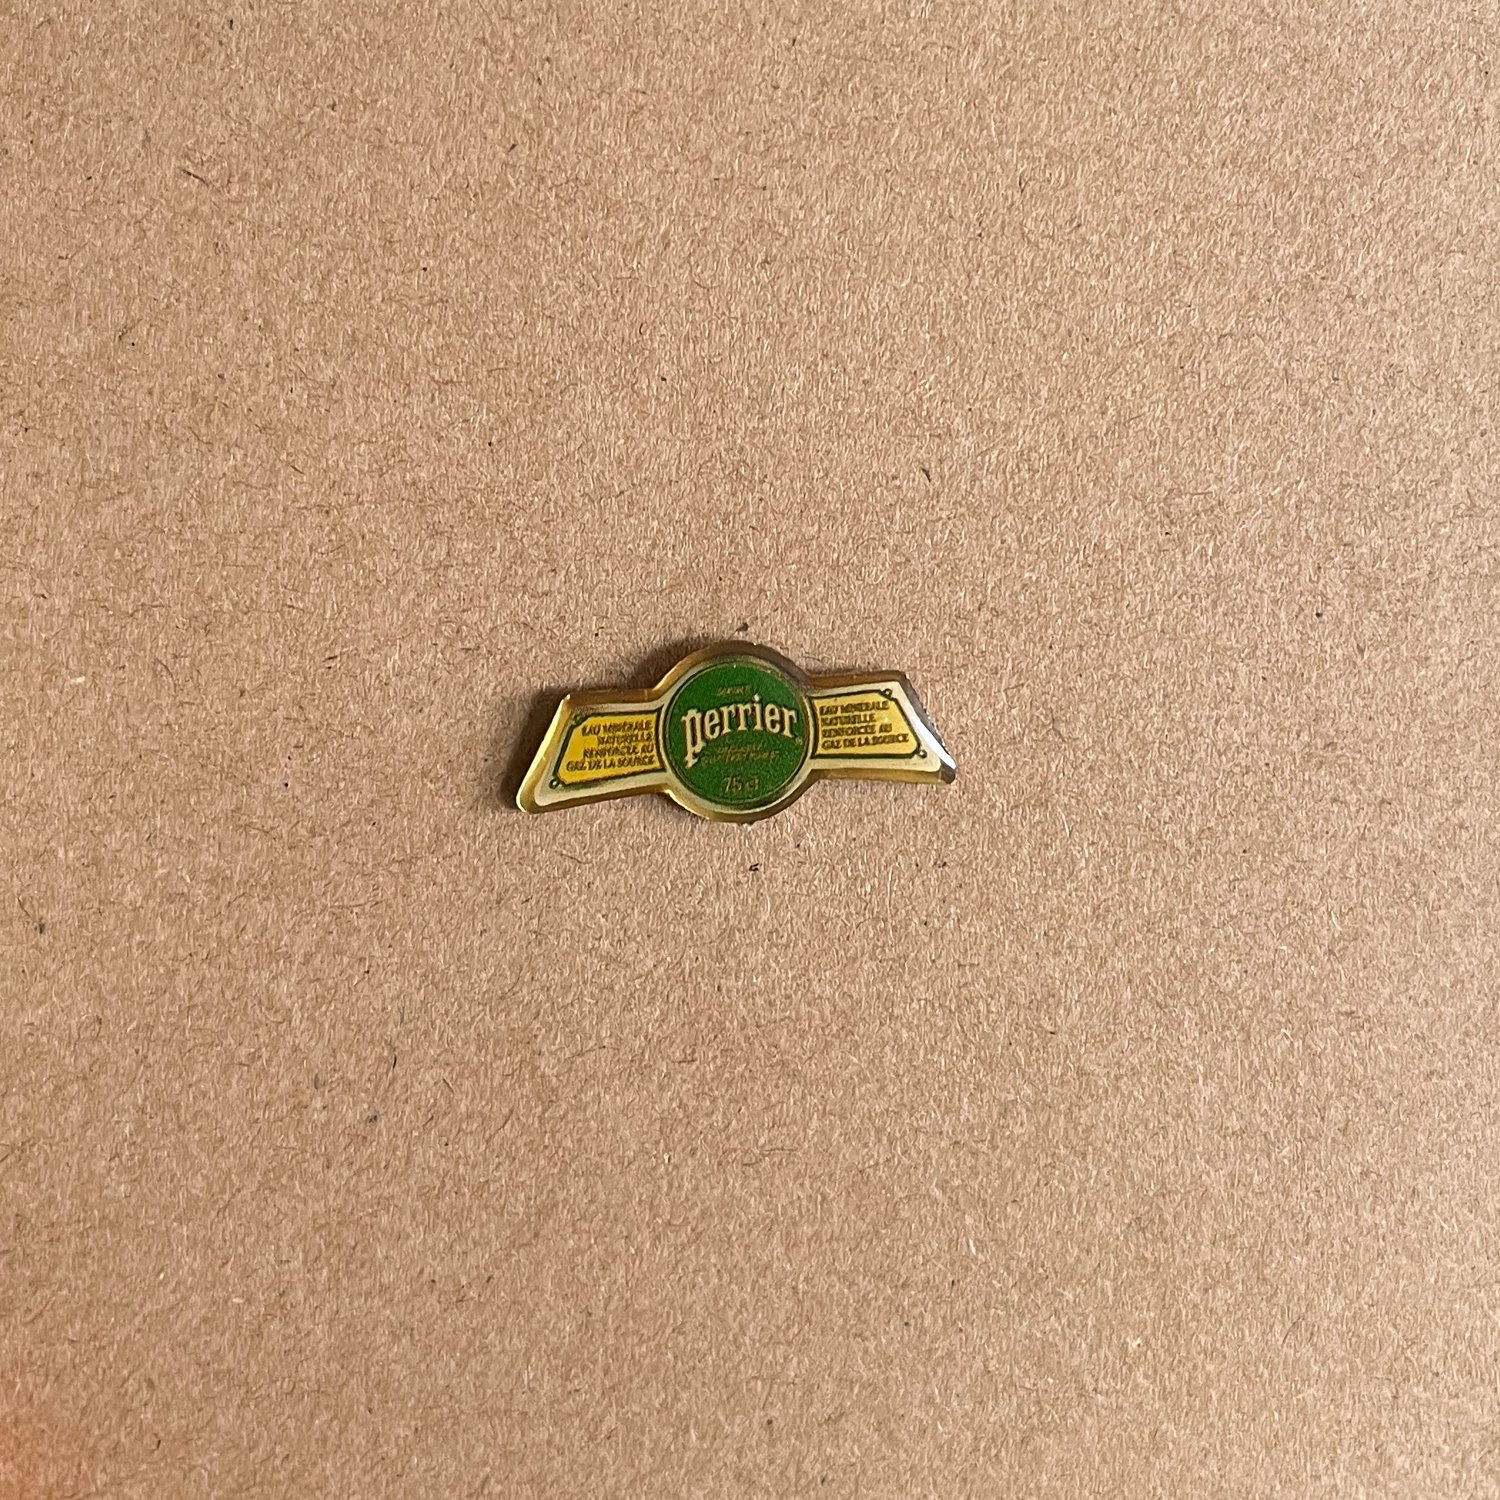 Image of Perrier Label Pin